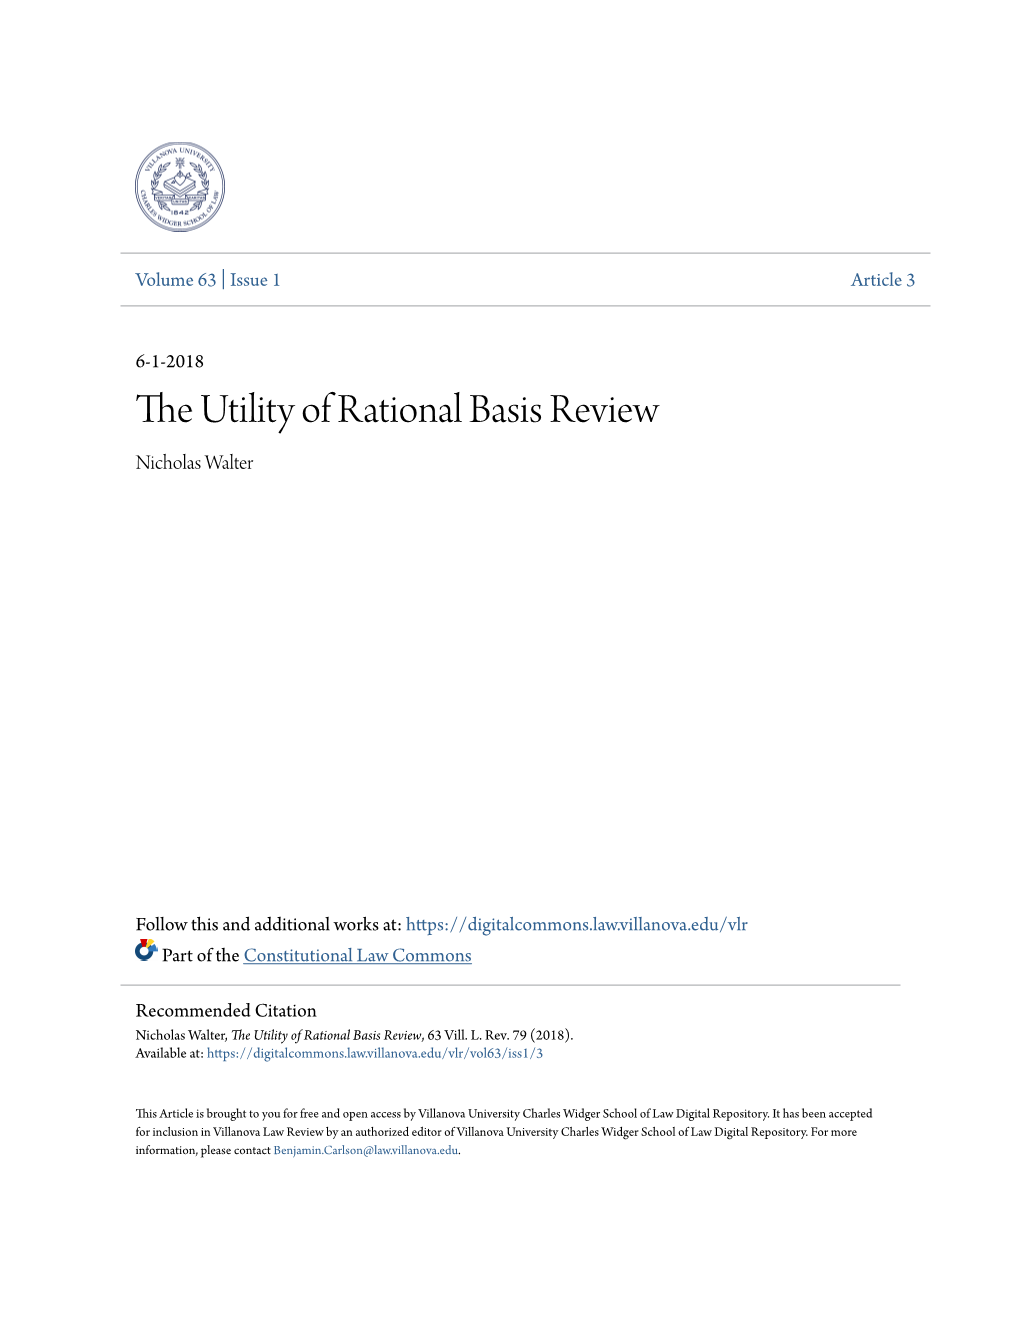 The Utility of Rational Basis Review, 63 Vill